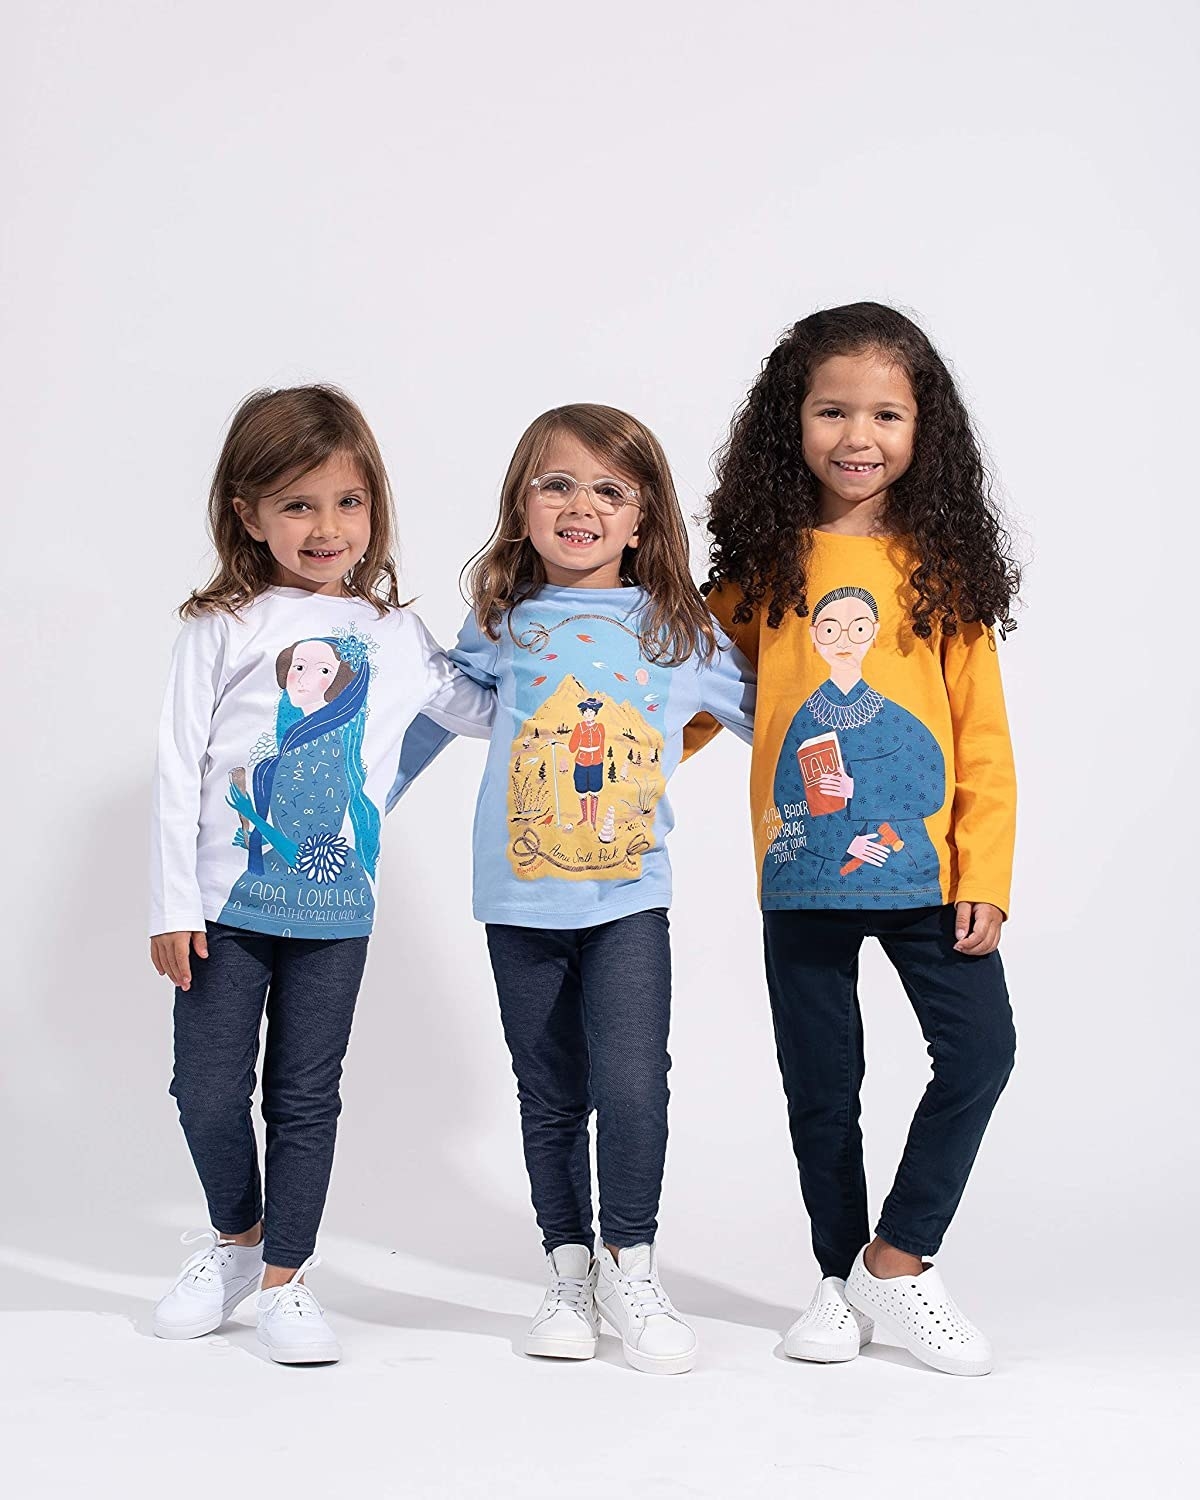 Three girl models wearing long-sleeve Piccolina shirts each with a powerful female graphic on the front: Ada Lovelace, Annie Smith Pock, and Ruth Bader Ginsburg